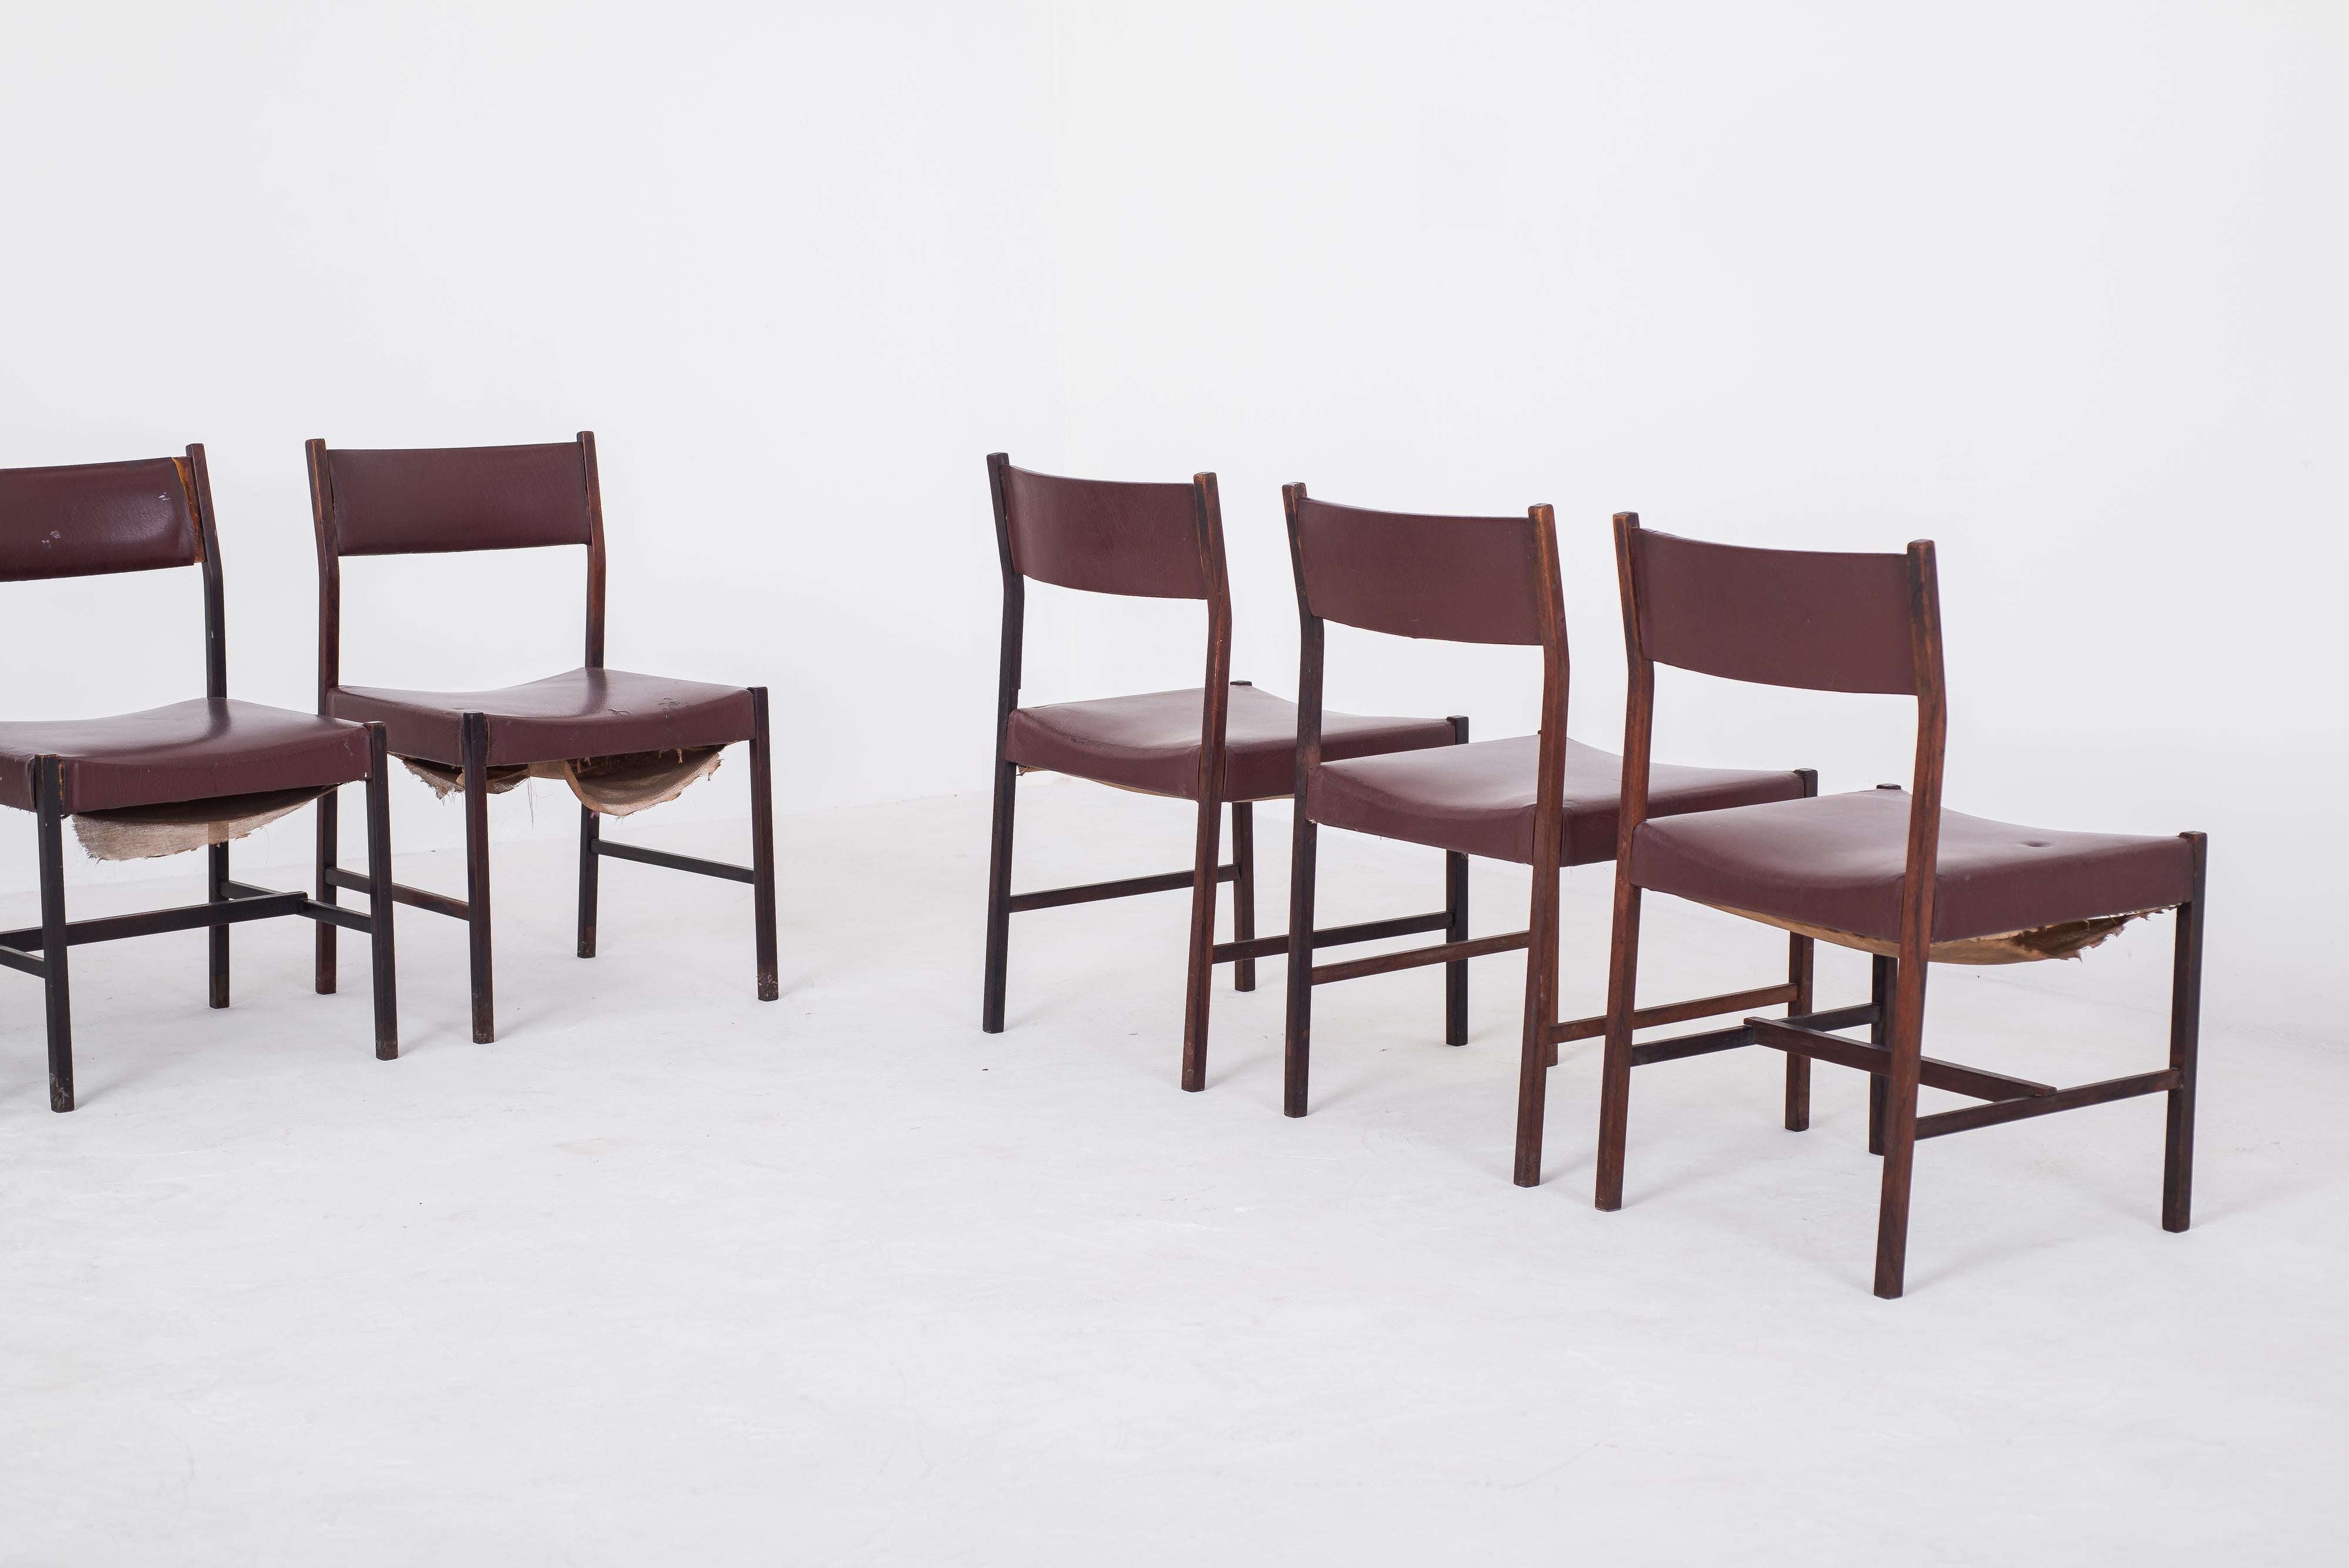 20th Century Set of 7 Itamaraty Dining Chairs in Original Condition By Jorge Zalszupin, 1959 For Sale